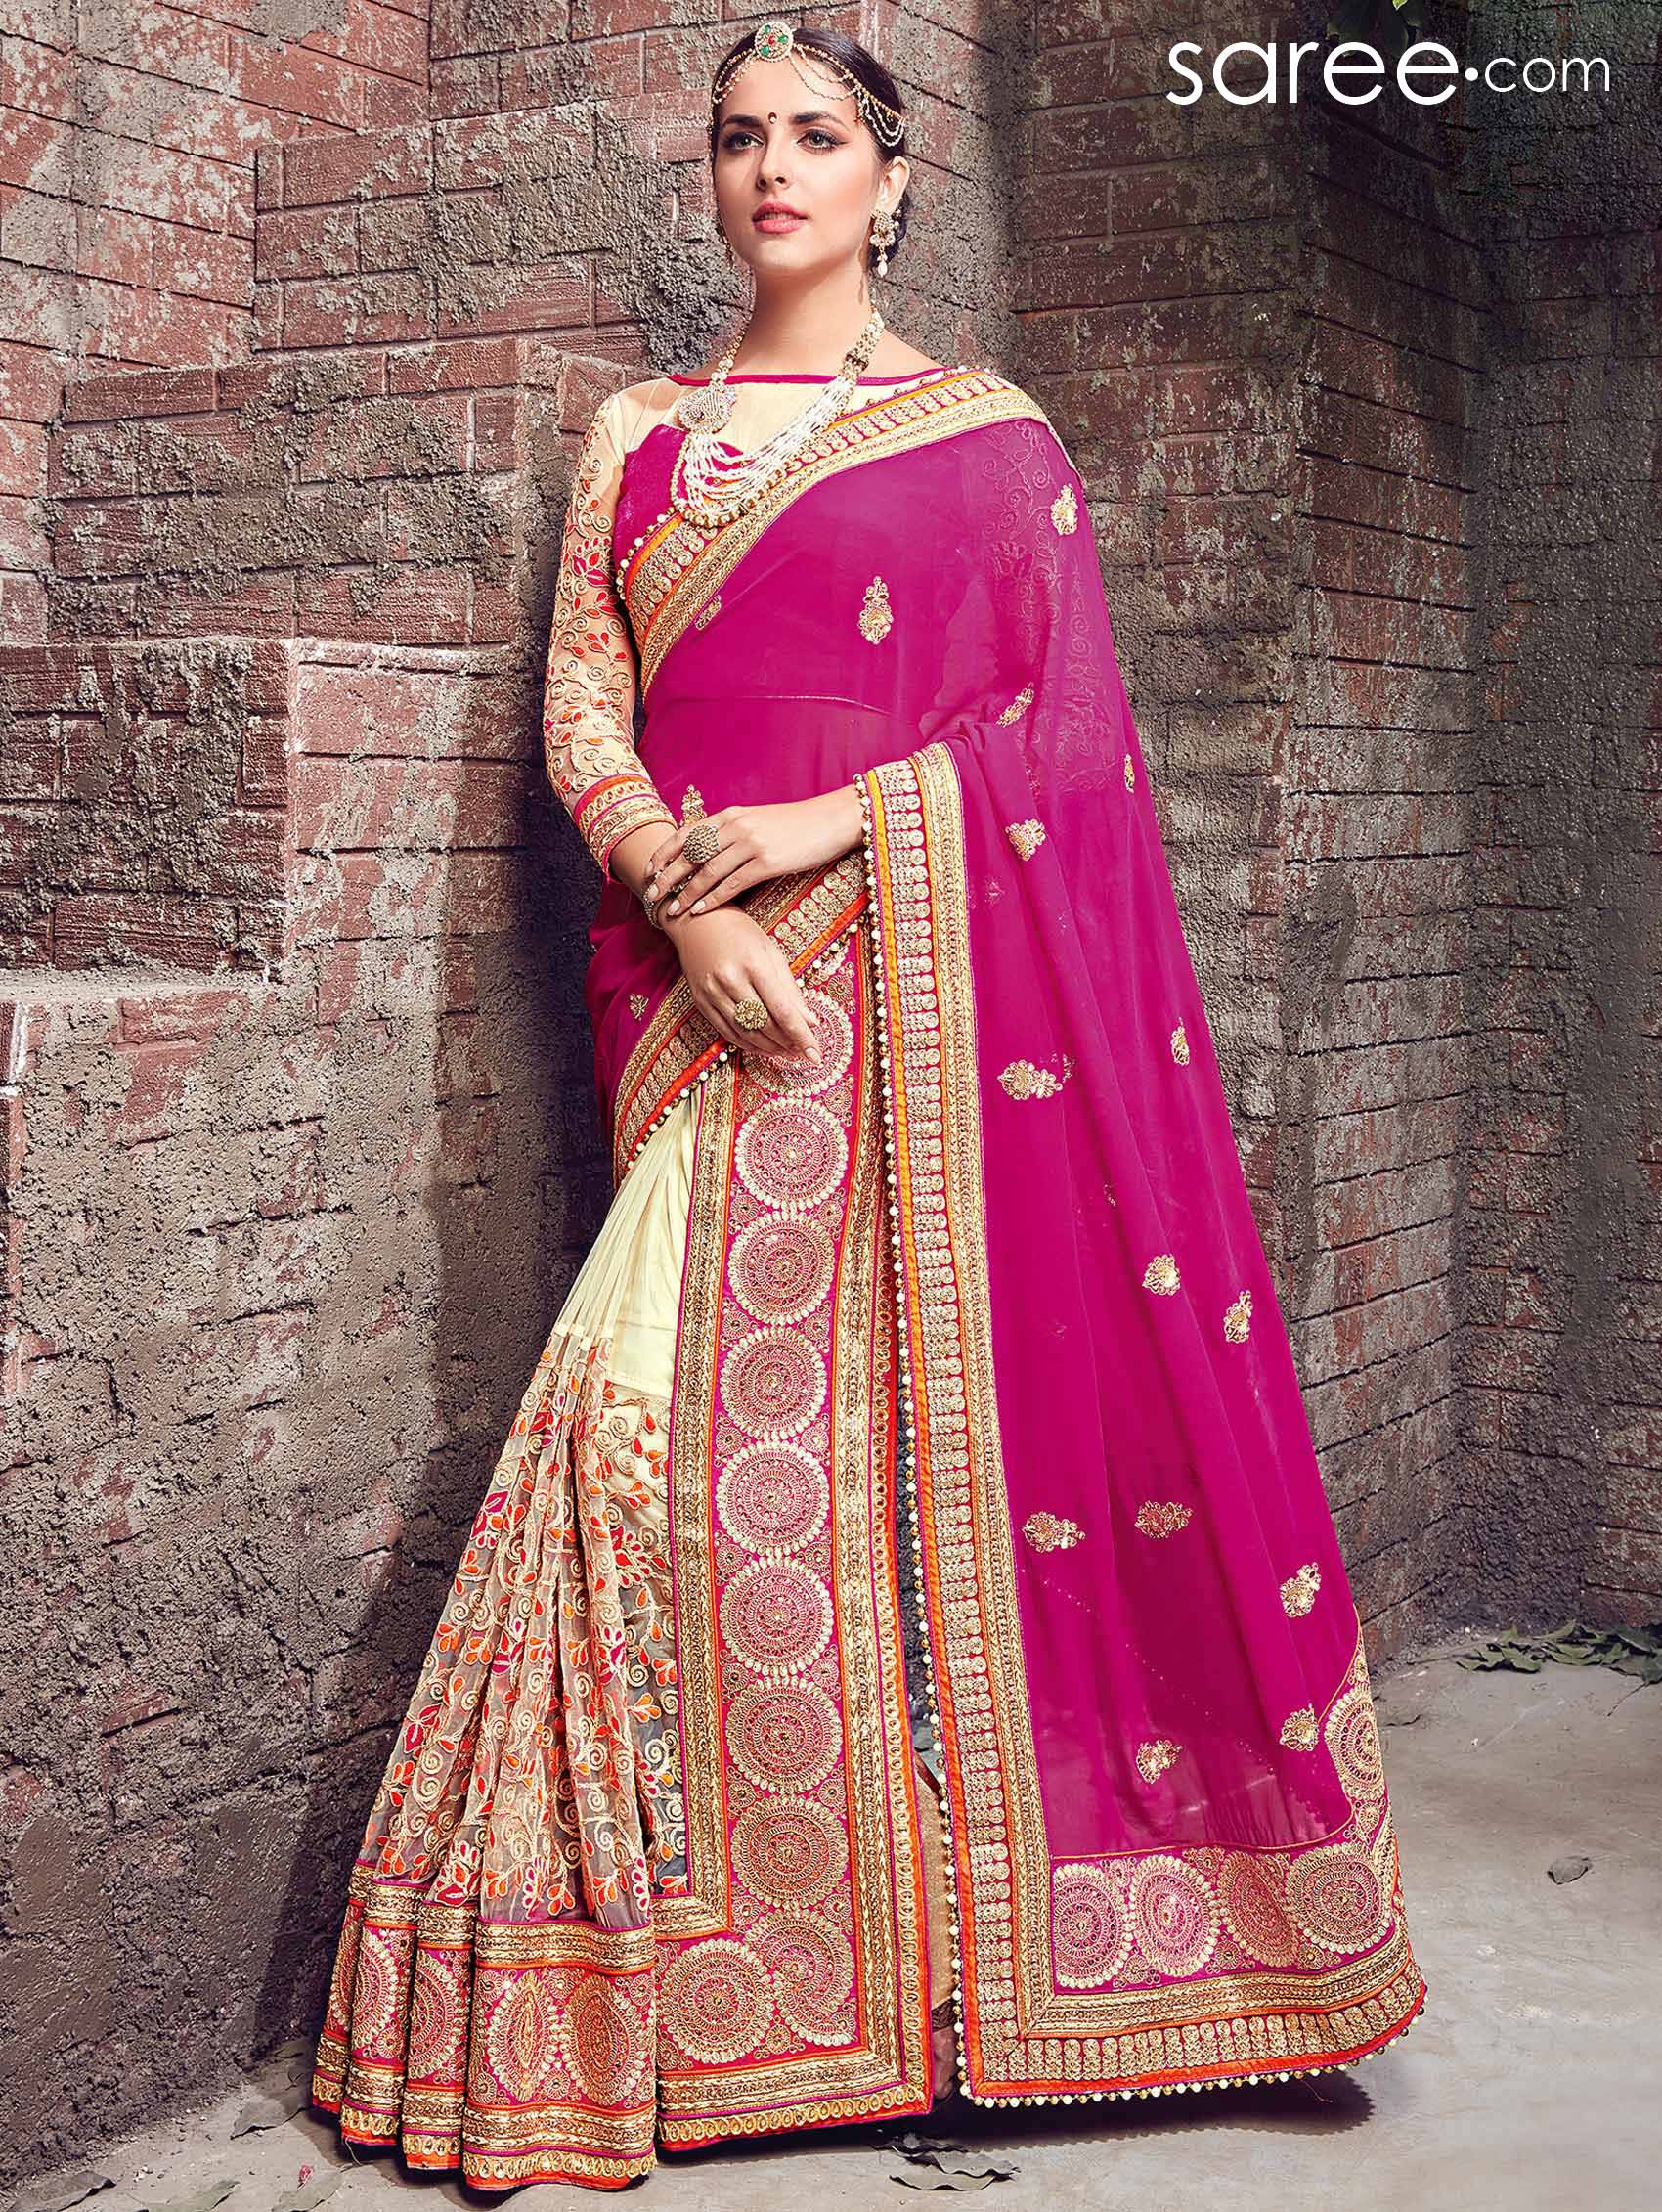 Classic appeal of a saree and the majestic grandeur of lehenga